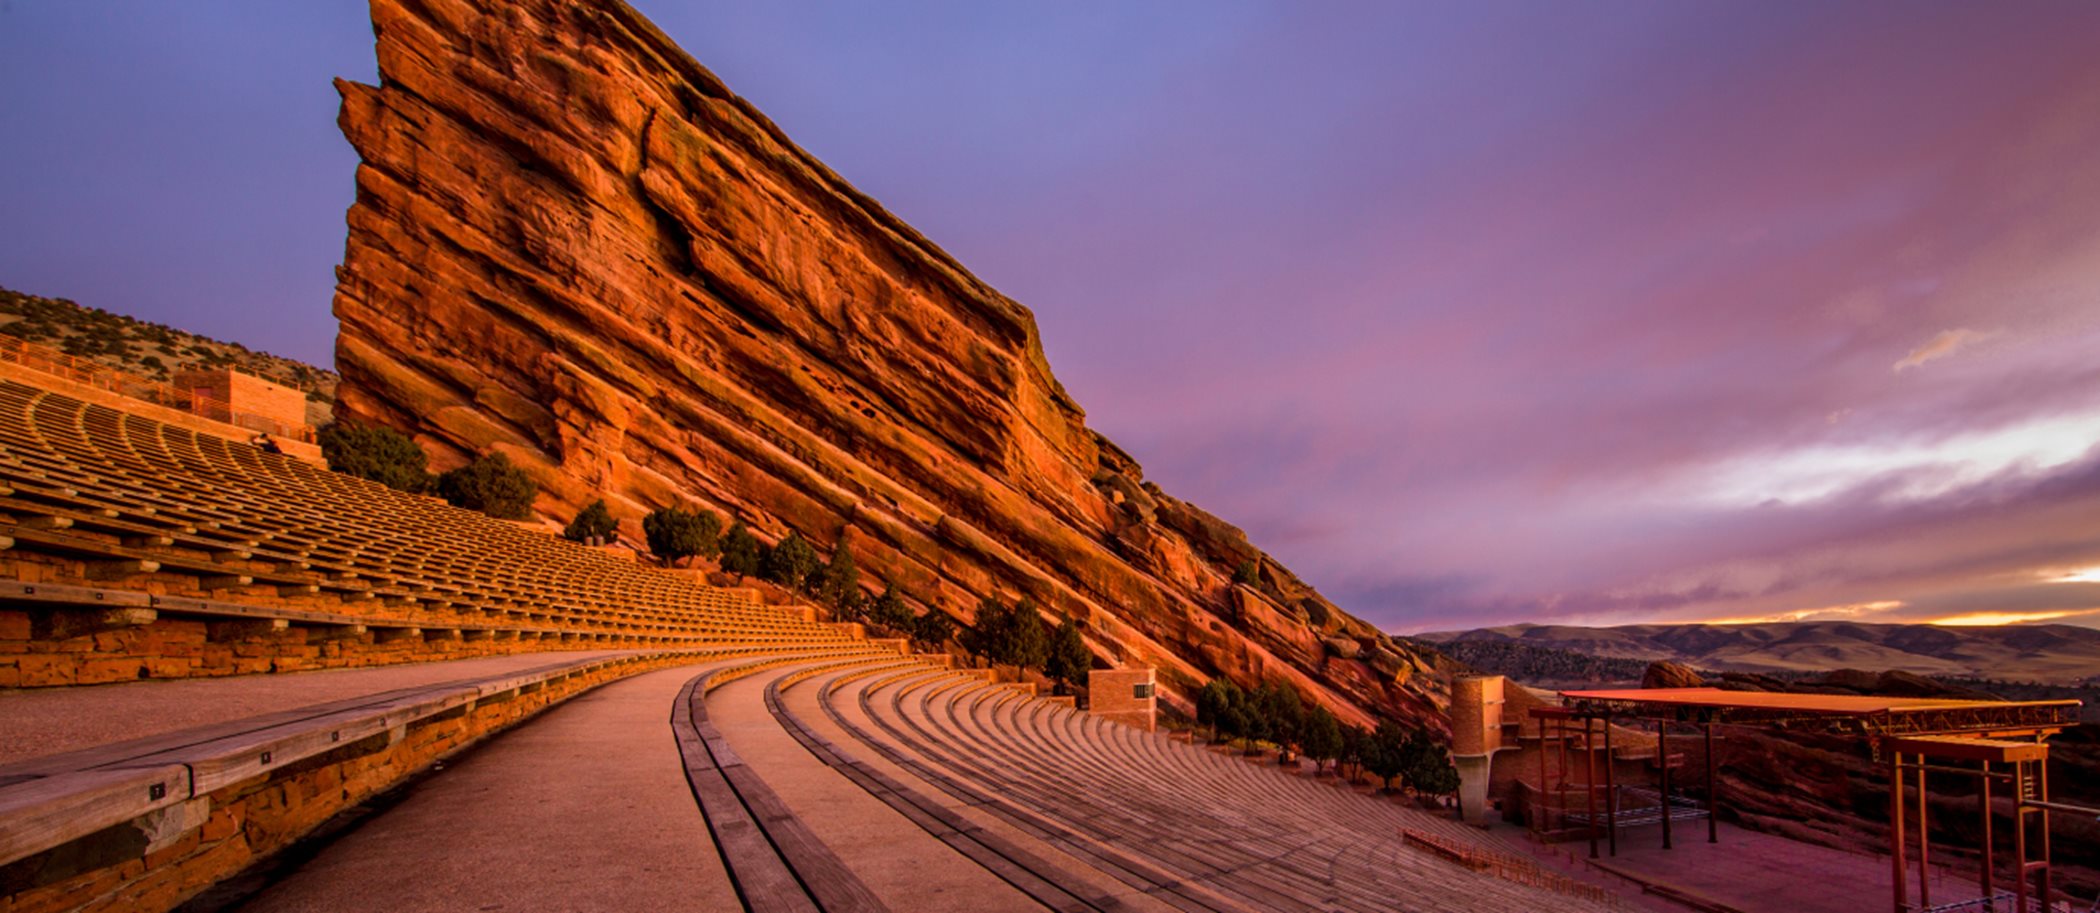 Red Rocks Ranch Amphitheater